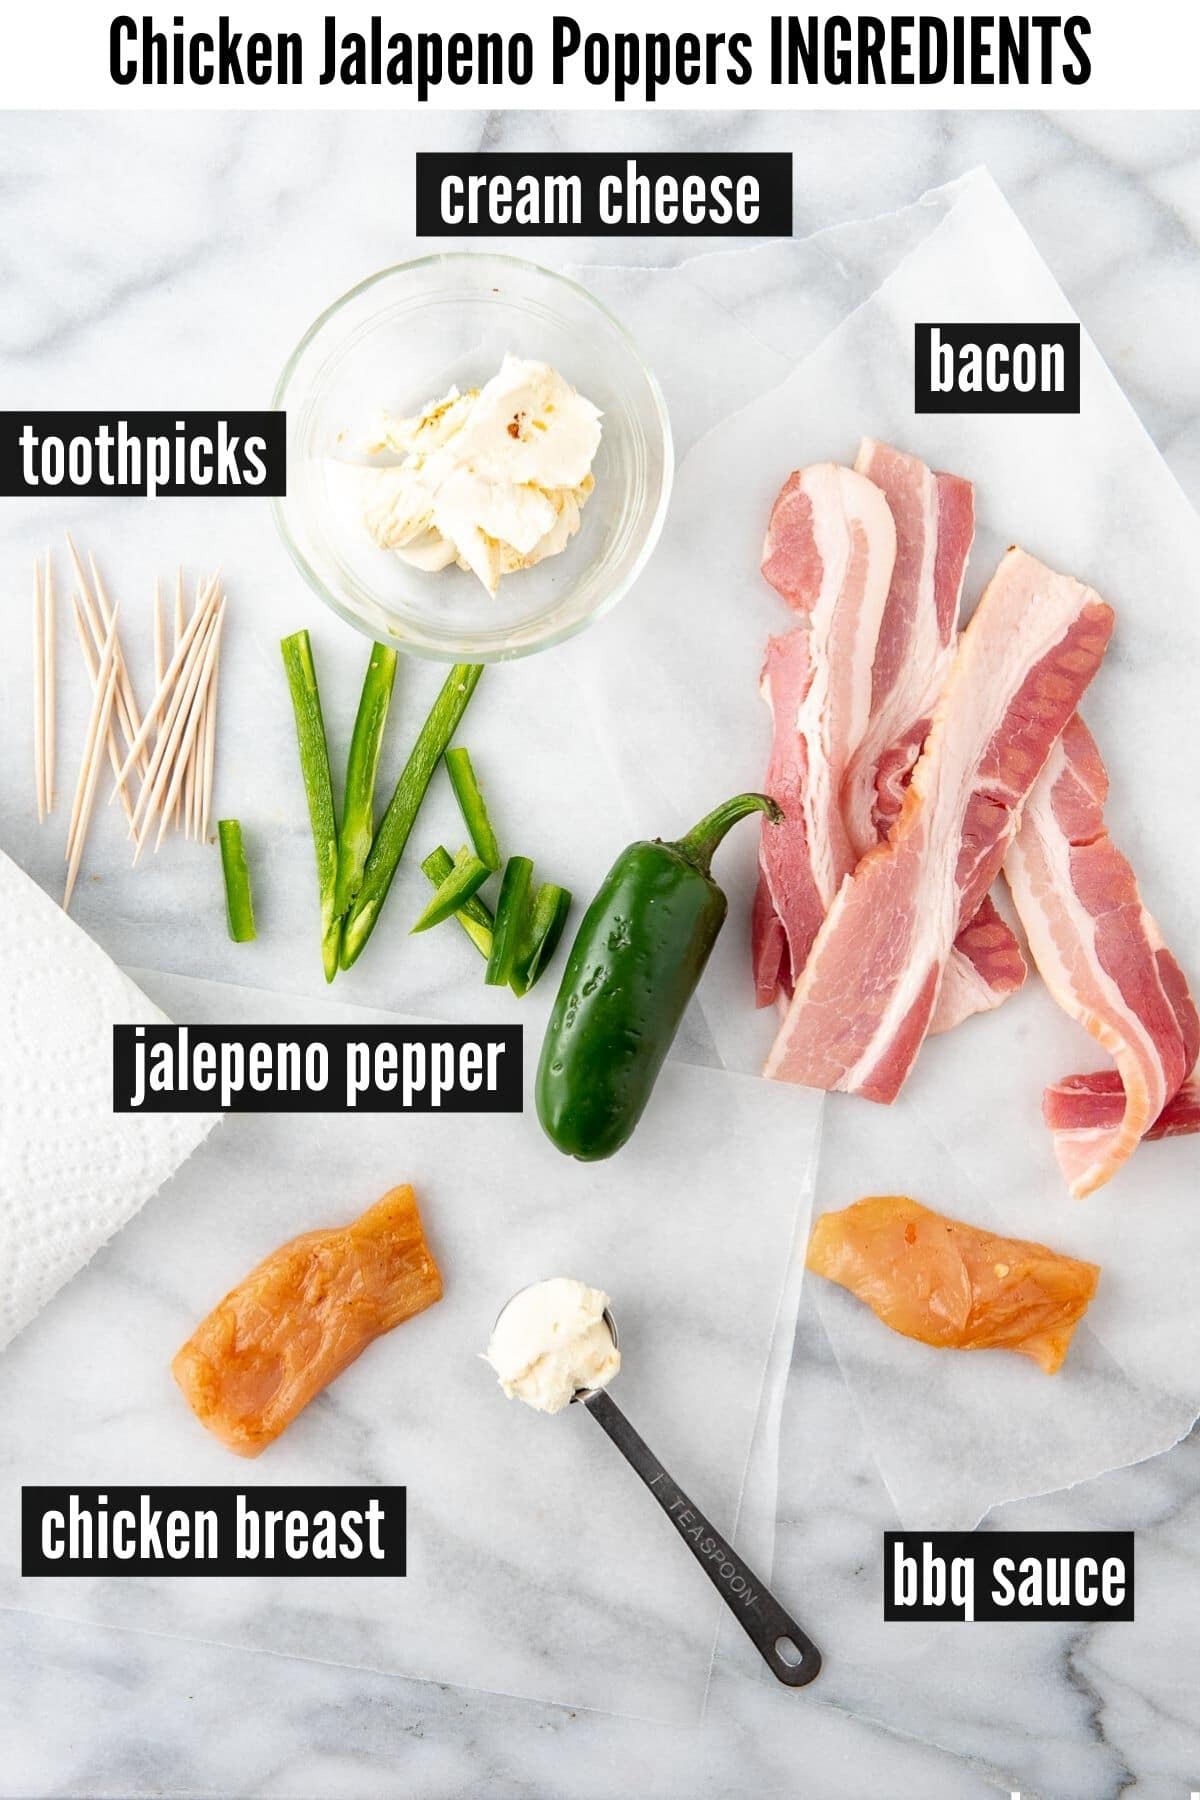 chicken jalapeno poppers ingredients